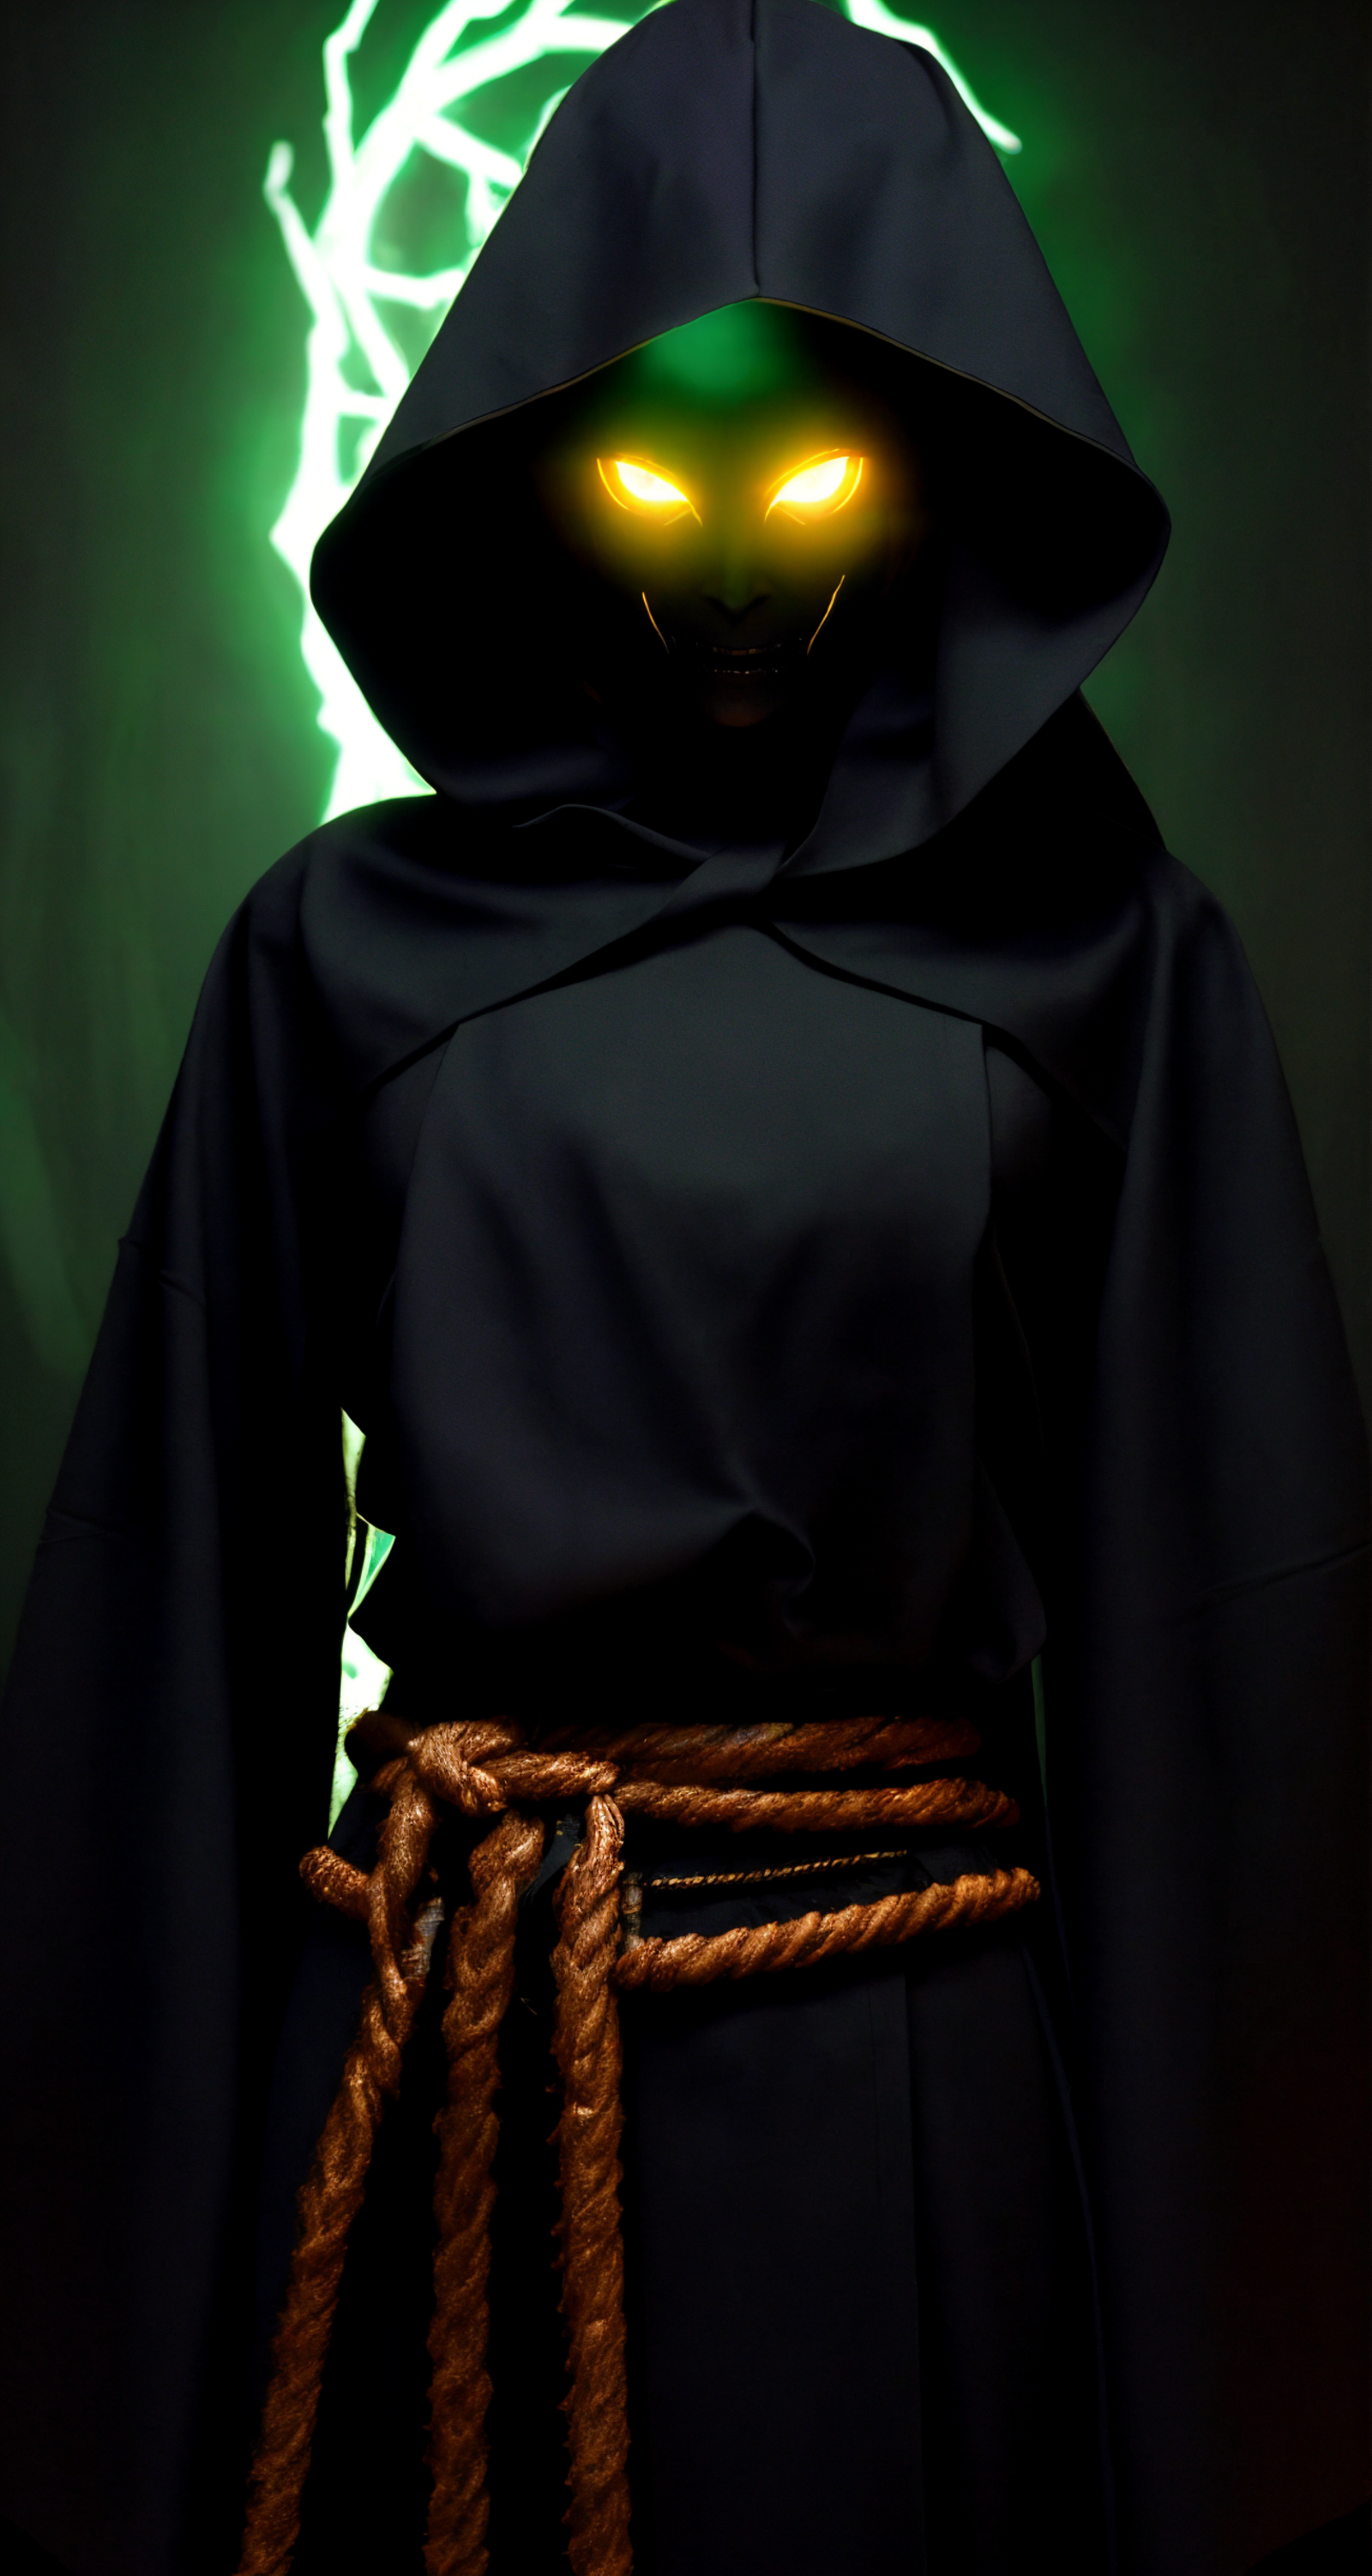 Cultist Hood - by EDG image by alexds9